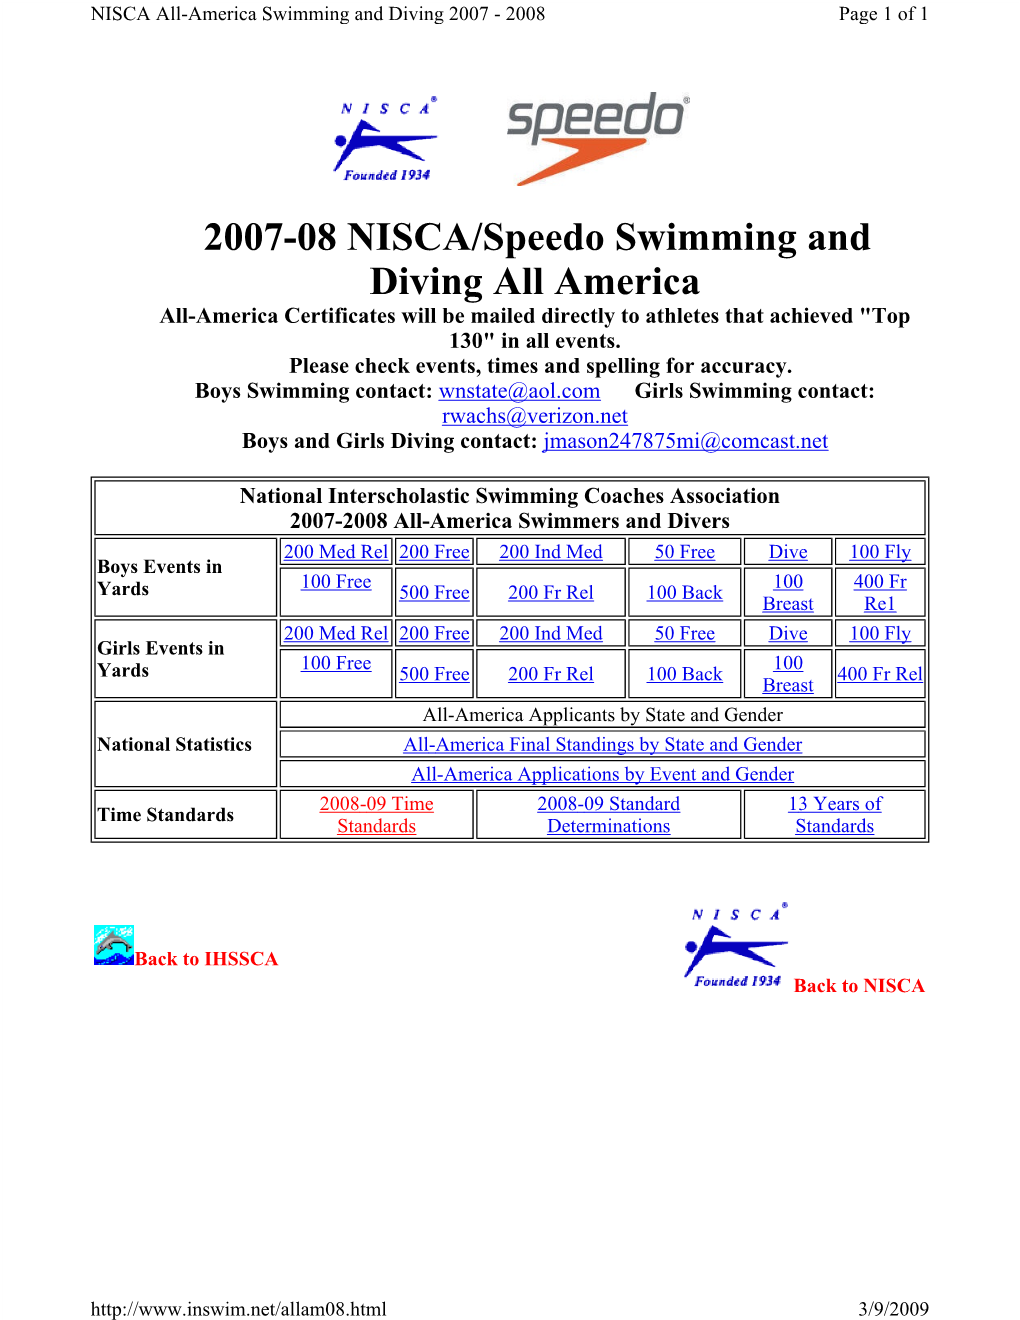 2007-08 NISCA/Speedo Swimming and Diving All America All-America Certificates Will Be Mailed Directly to Athletes That Achieved "Top 130" in All Events